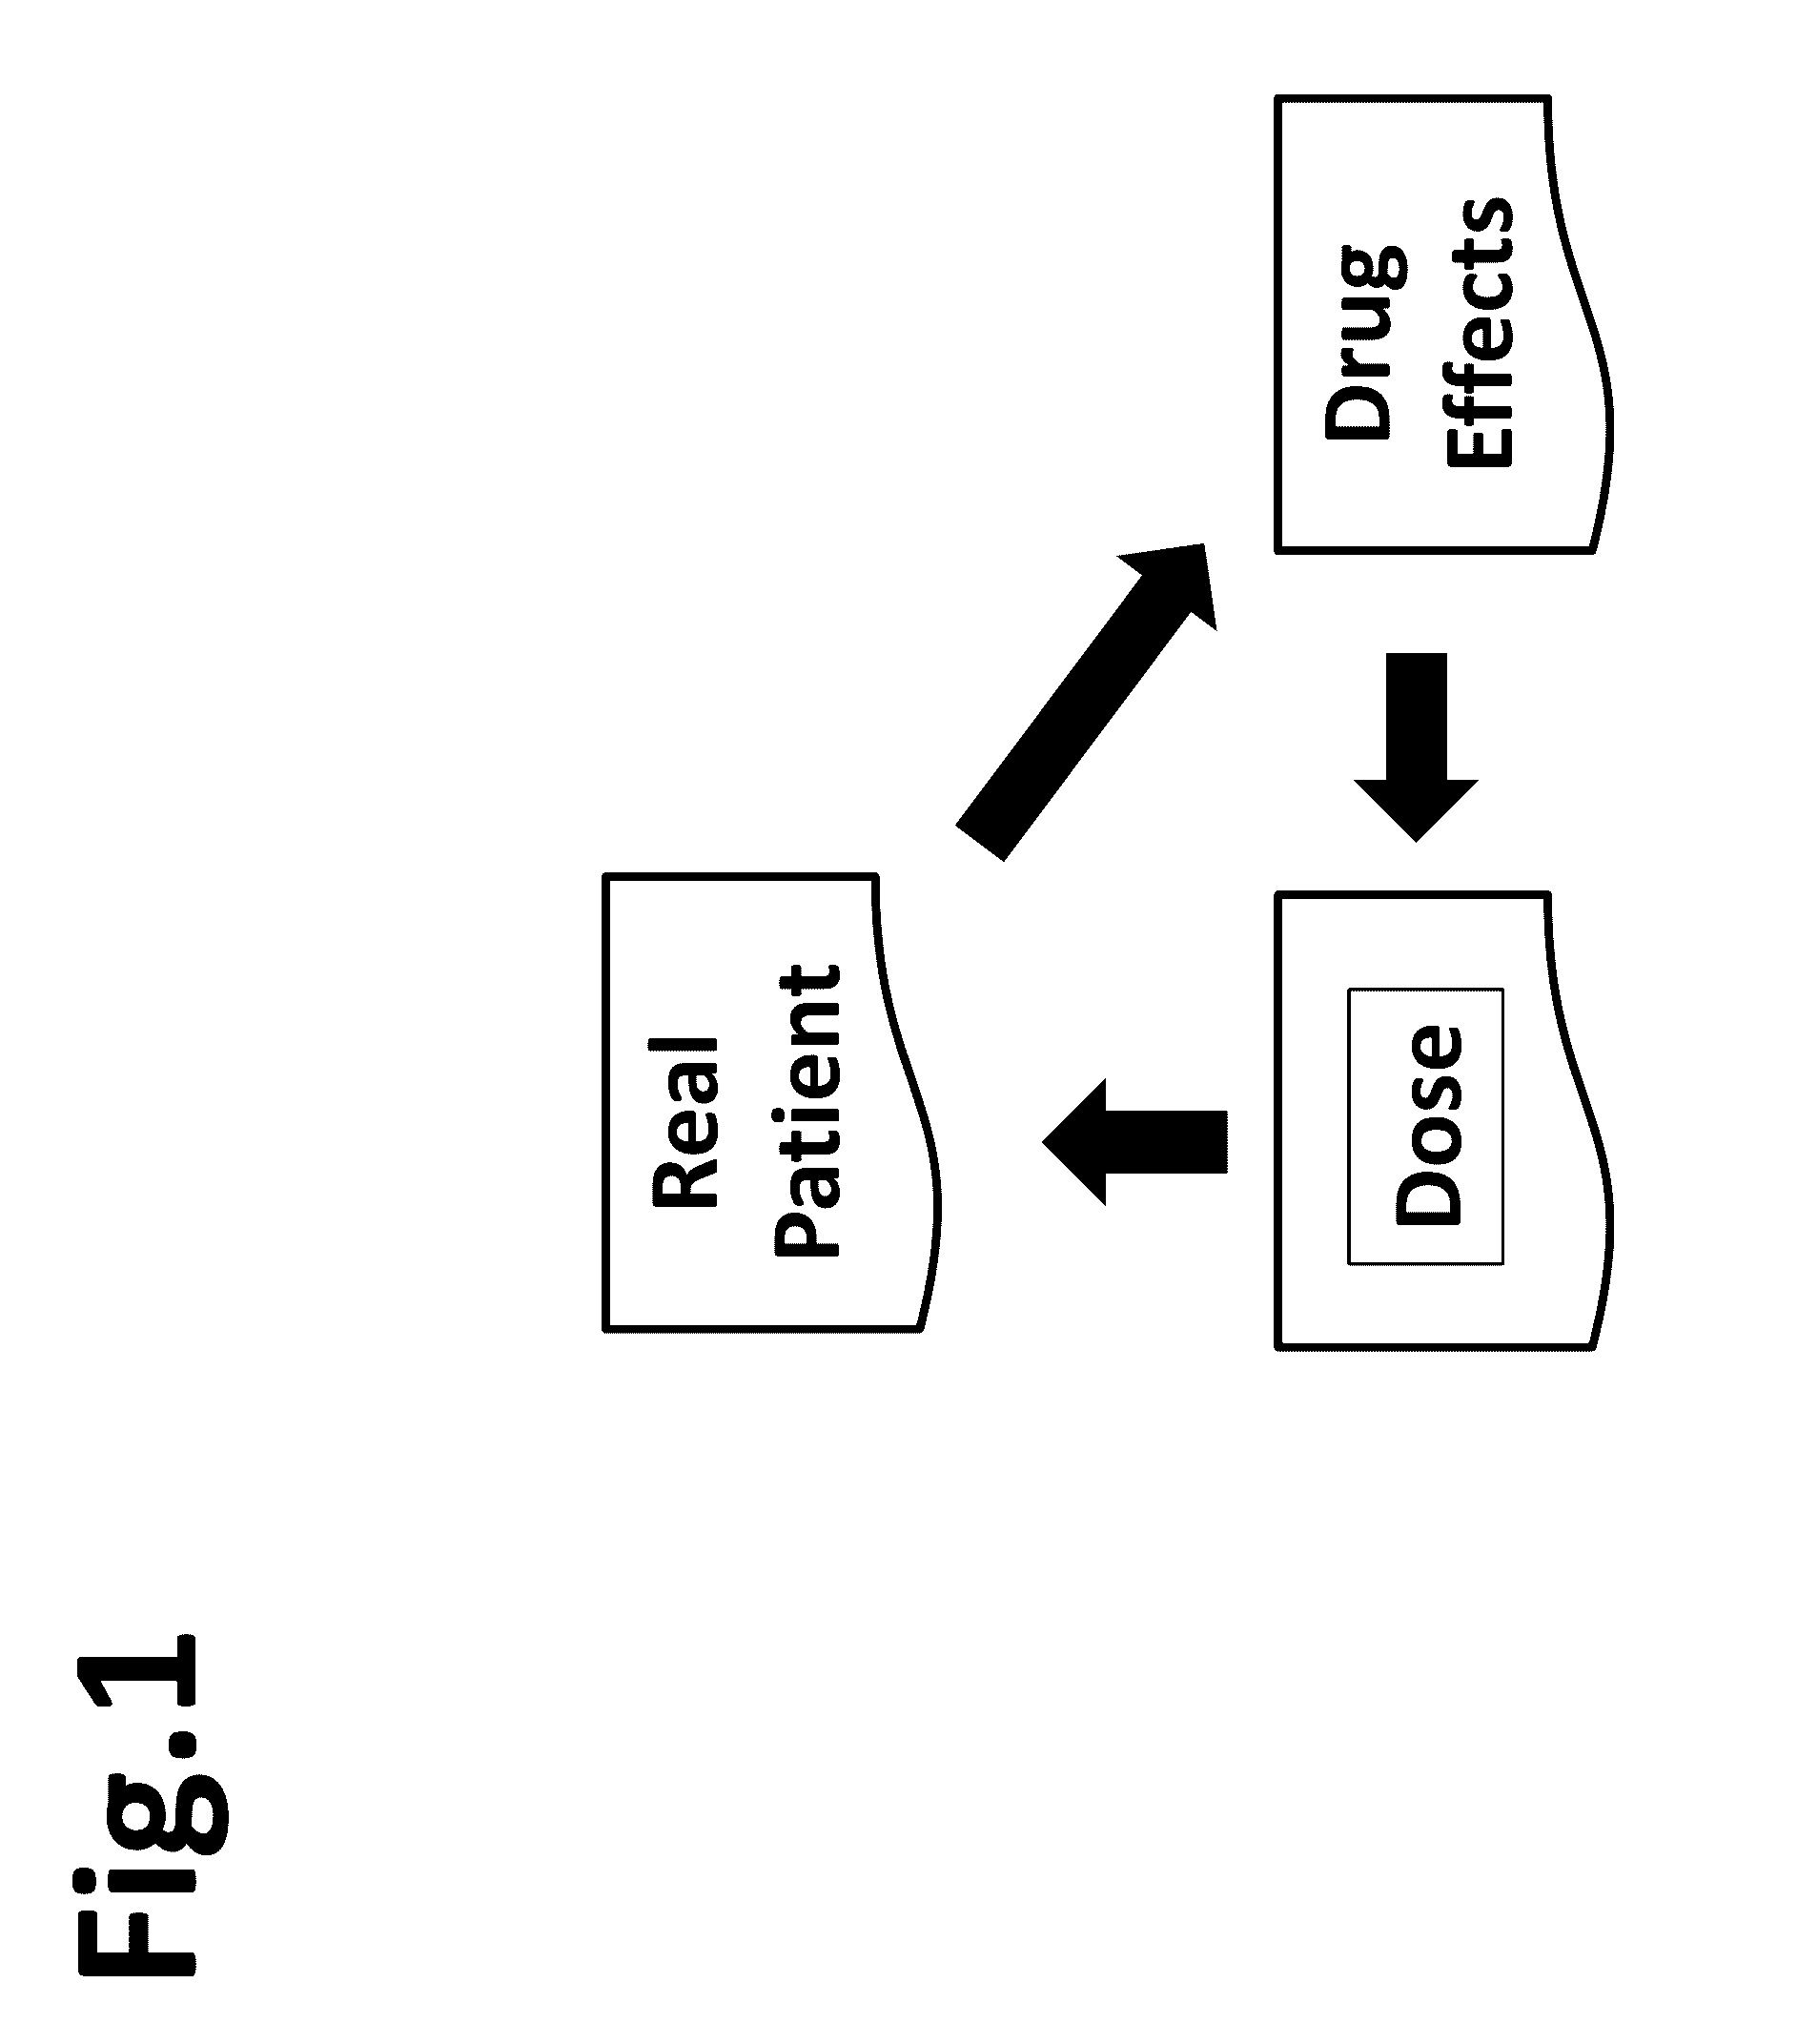 Systems and methods for predicting and adjusting the dosage of medicines in individual patients